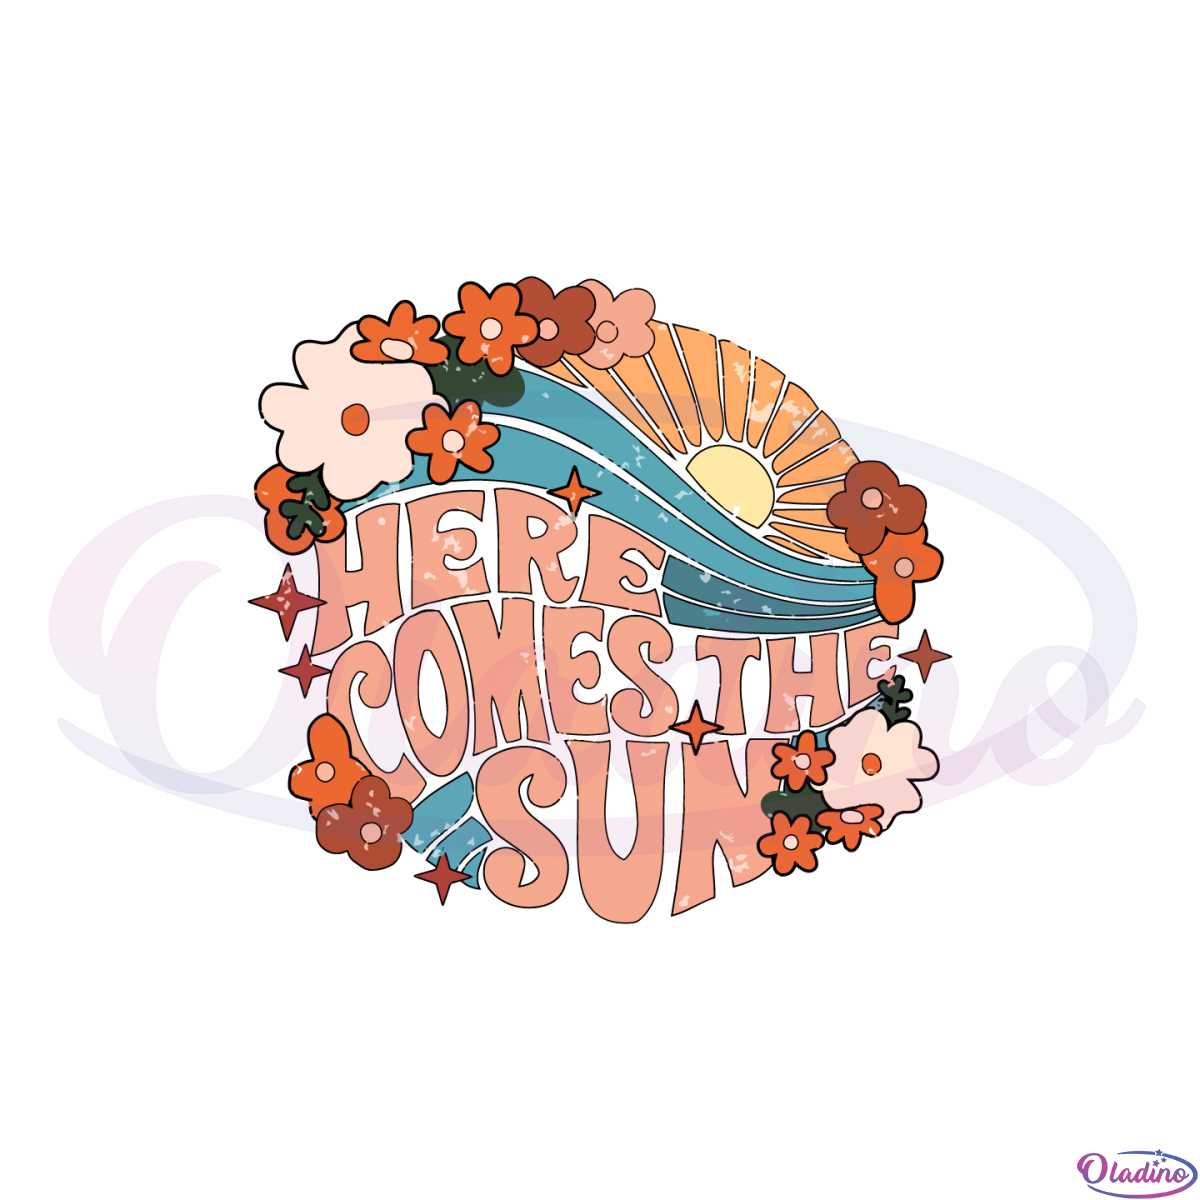 retro-floral-here-comes-the-sun-the-beatles-svg-cutting-files